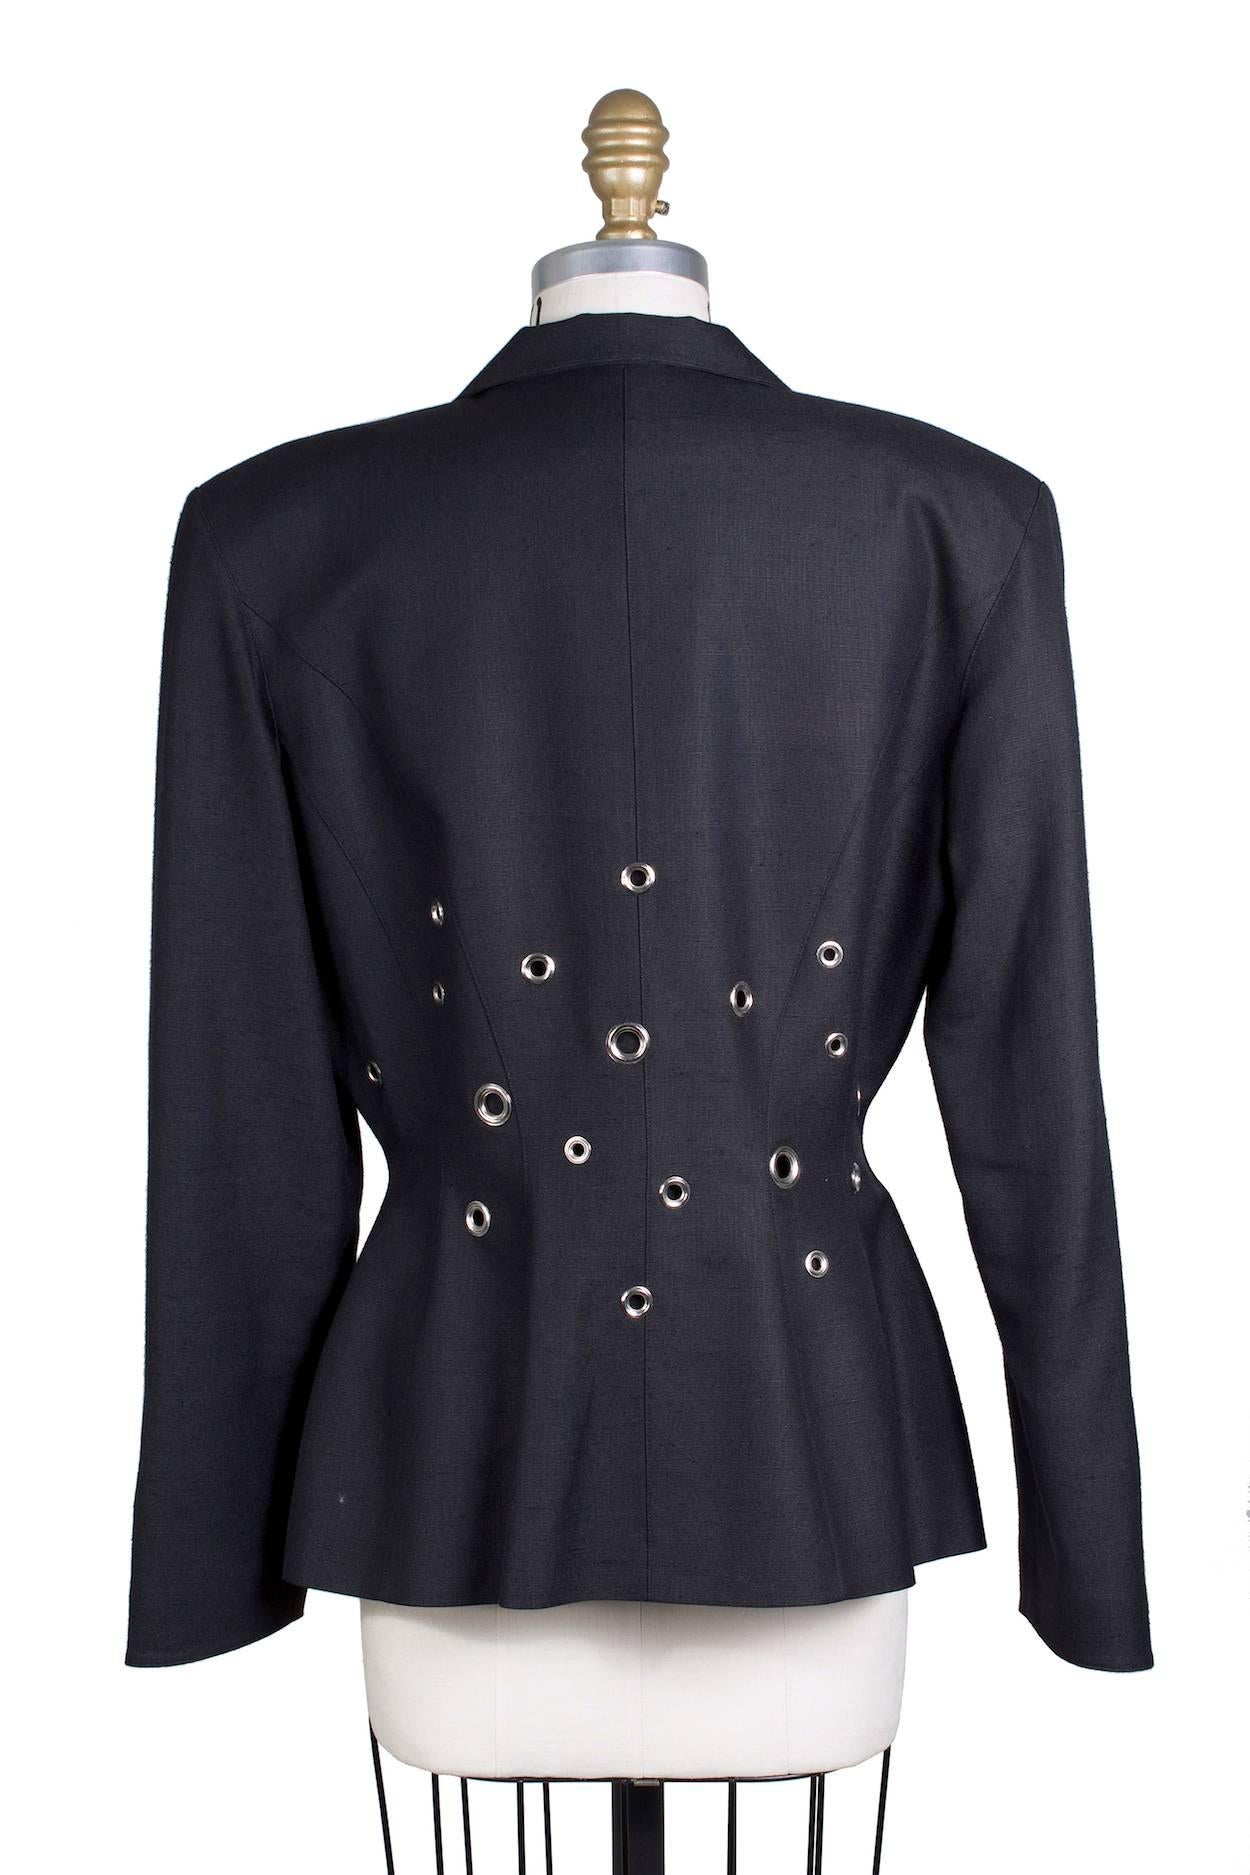 This is a blazer by Thierry Mugler c. 1990s.  It features a large lapel and grommets around the waist area.  It has two snap closures in front.

17